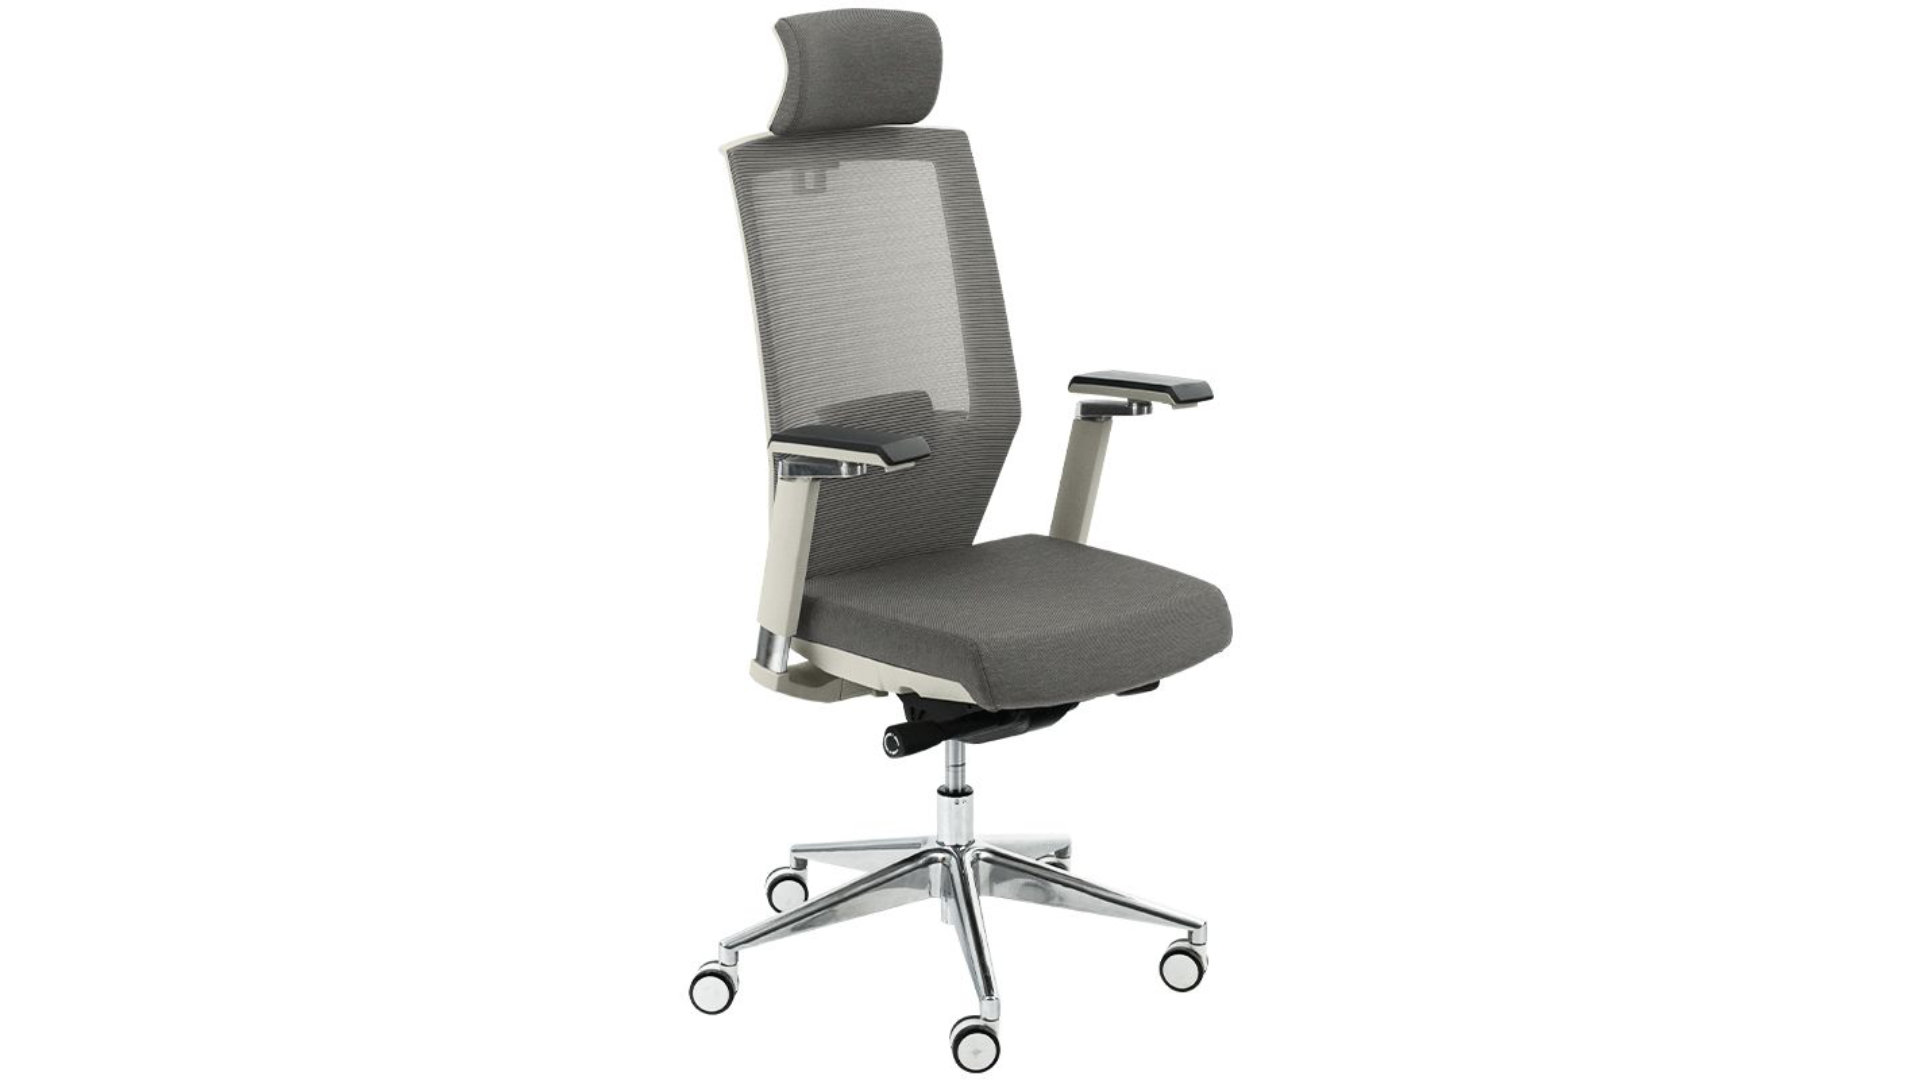 Flexispot BS10 review – a good office and gaming chair